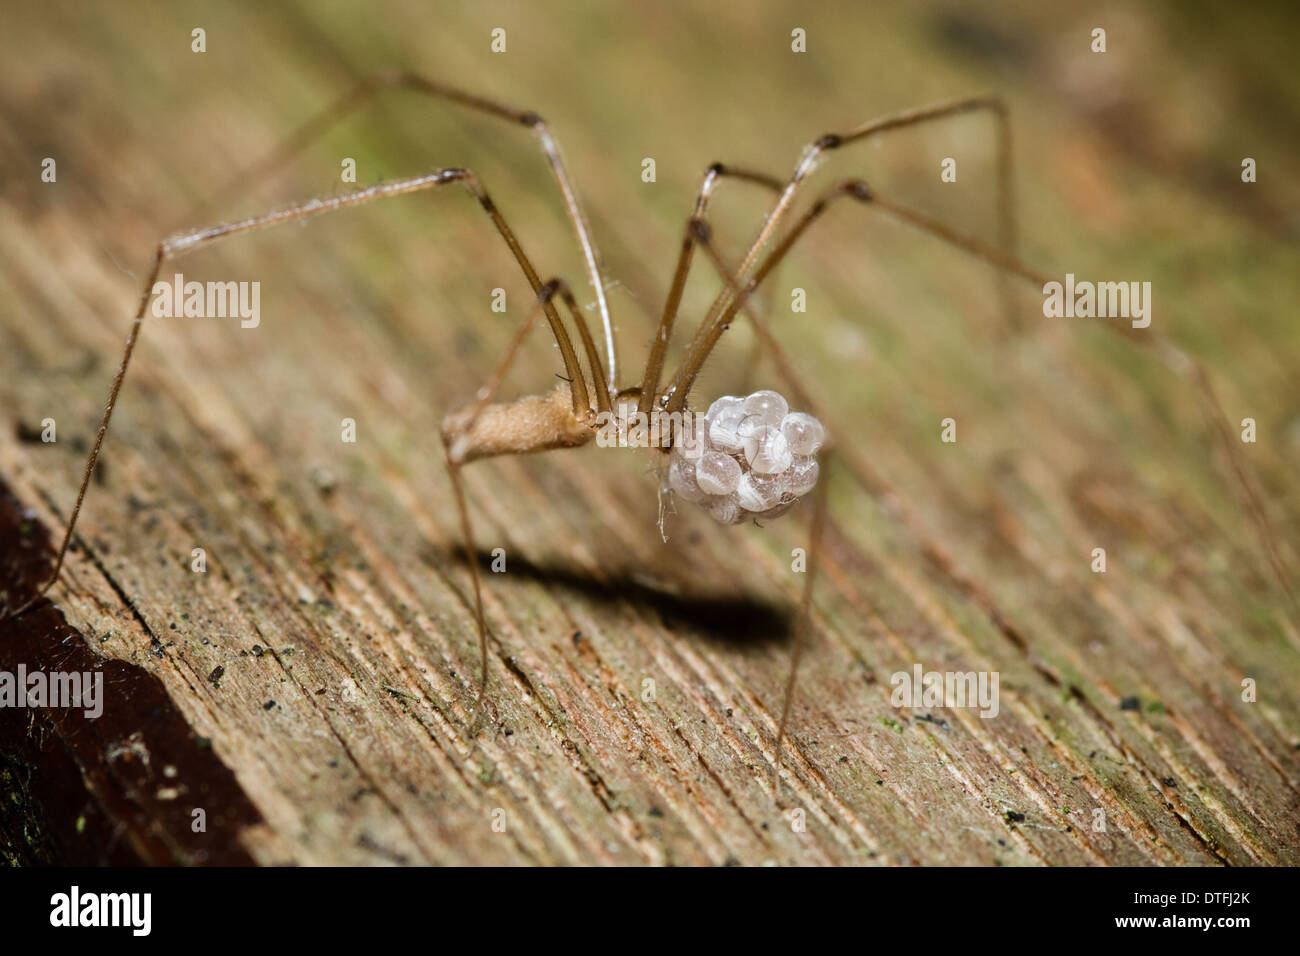 Female Daddy Long-legs Spider (Pholcus phalangioides) and eggs Stock Photo